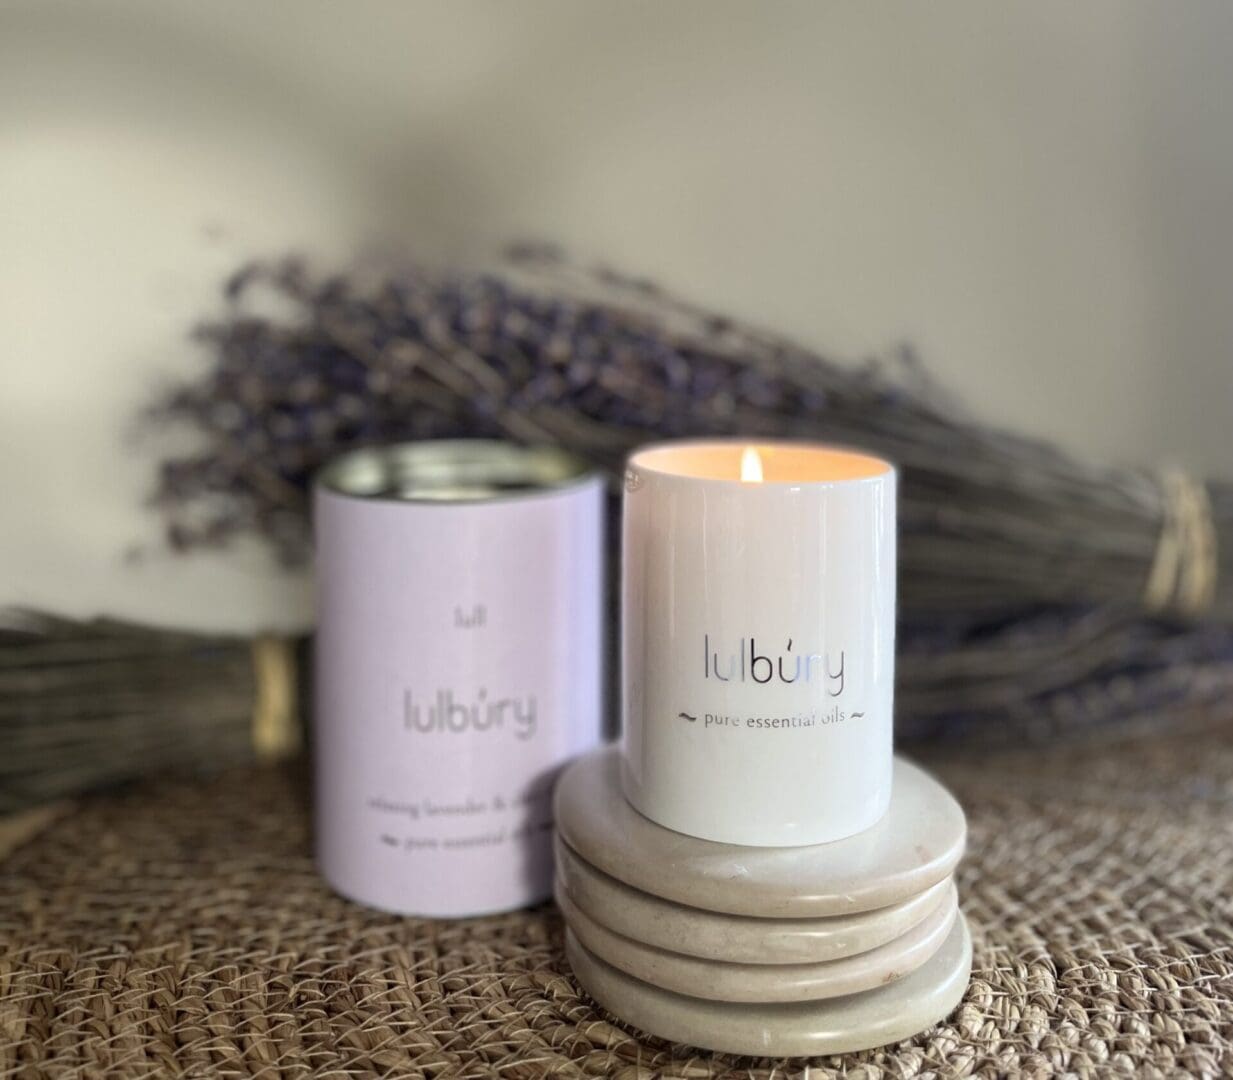 White candle jar lilac tube and lavender